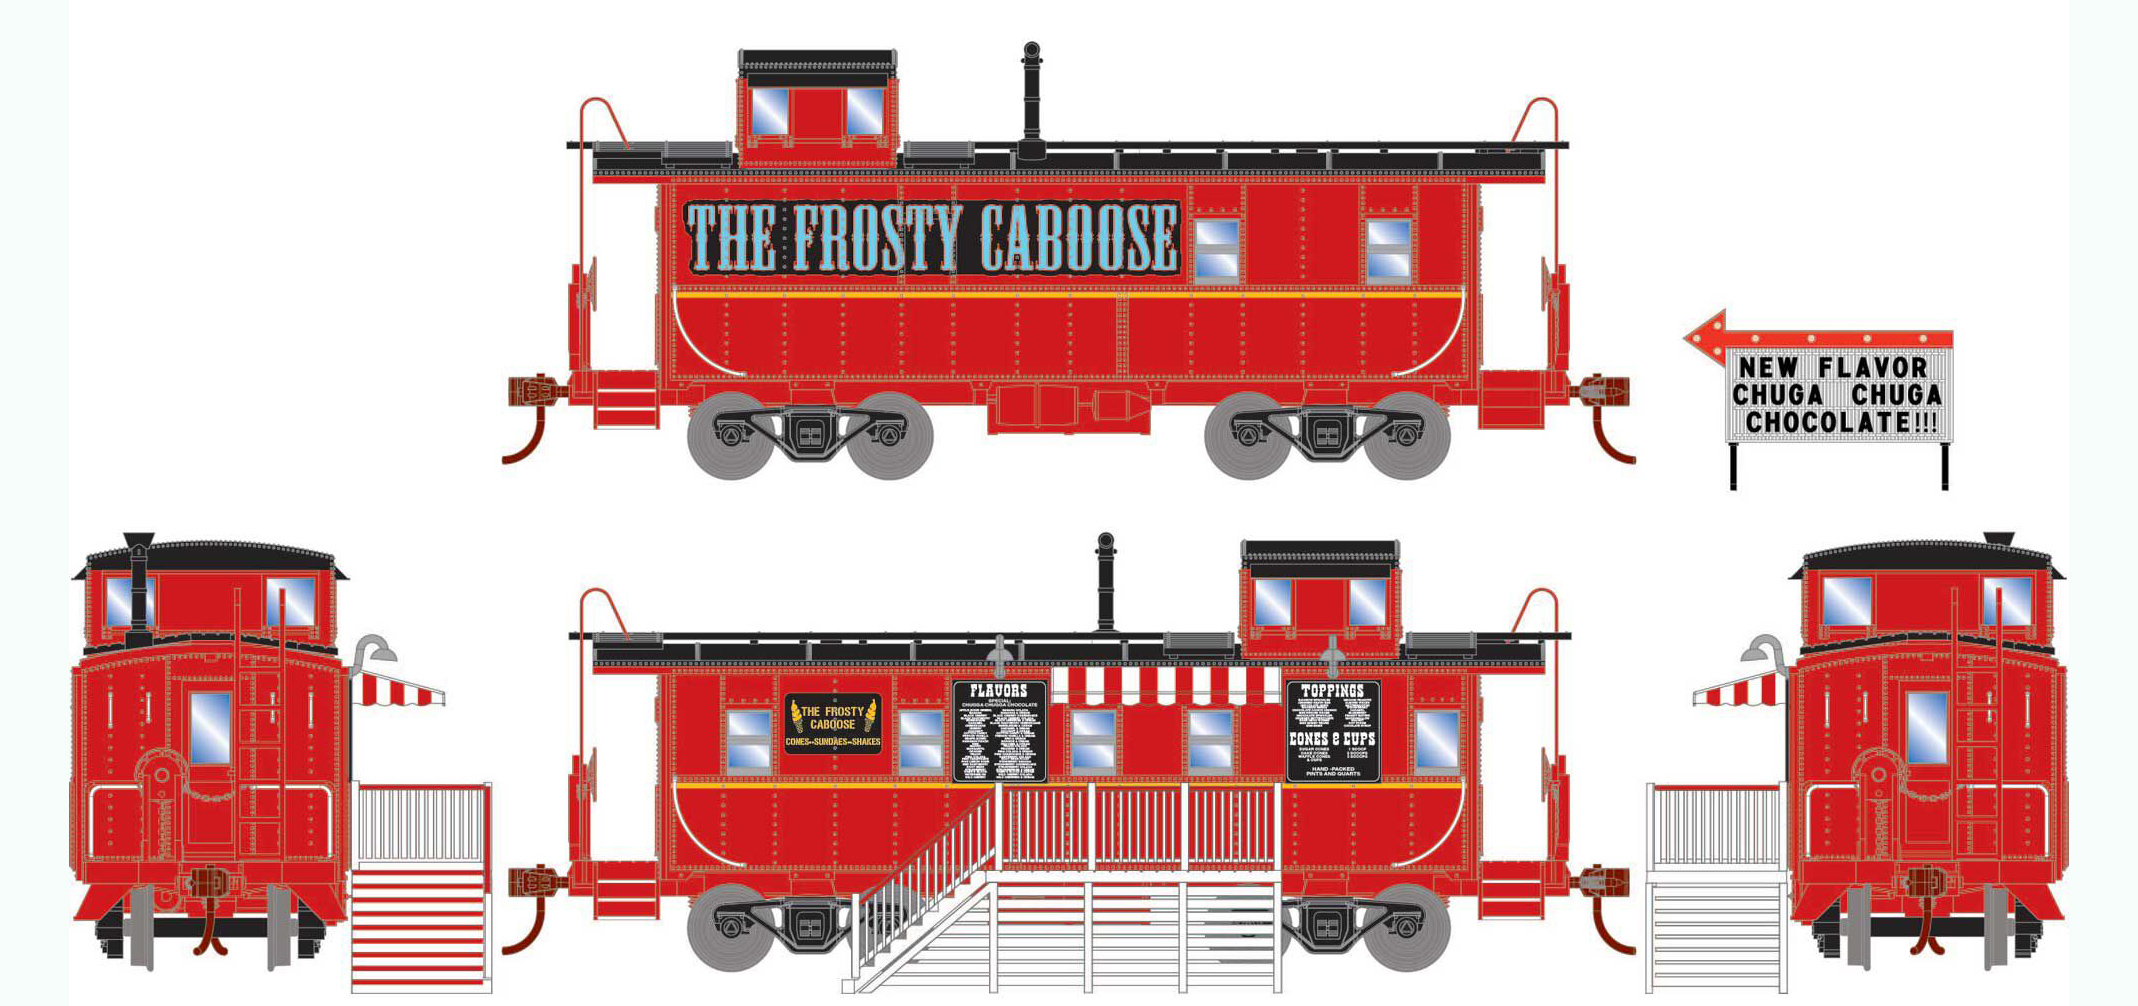 The Frosty Caboose